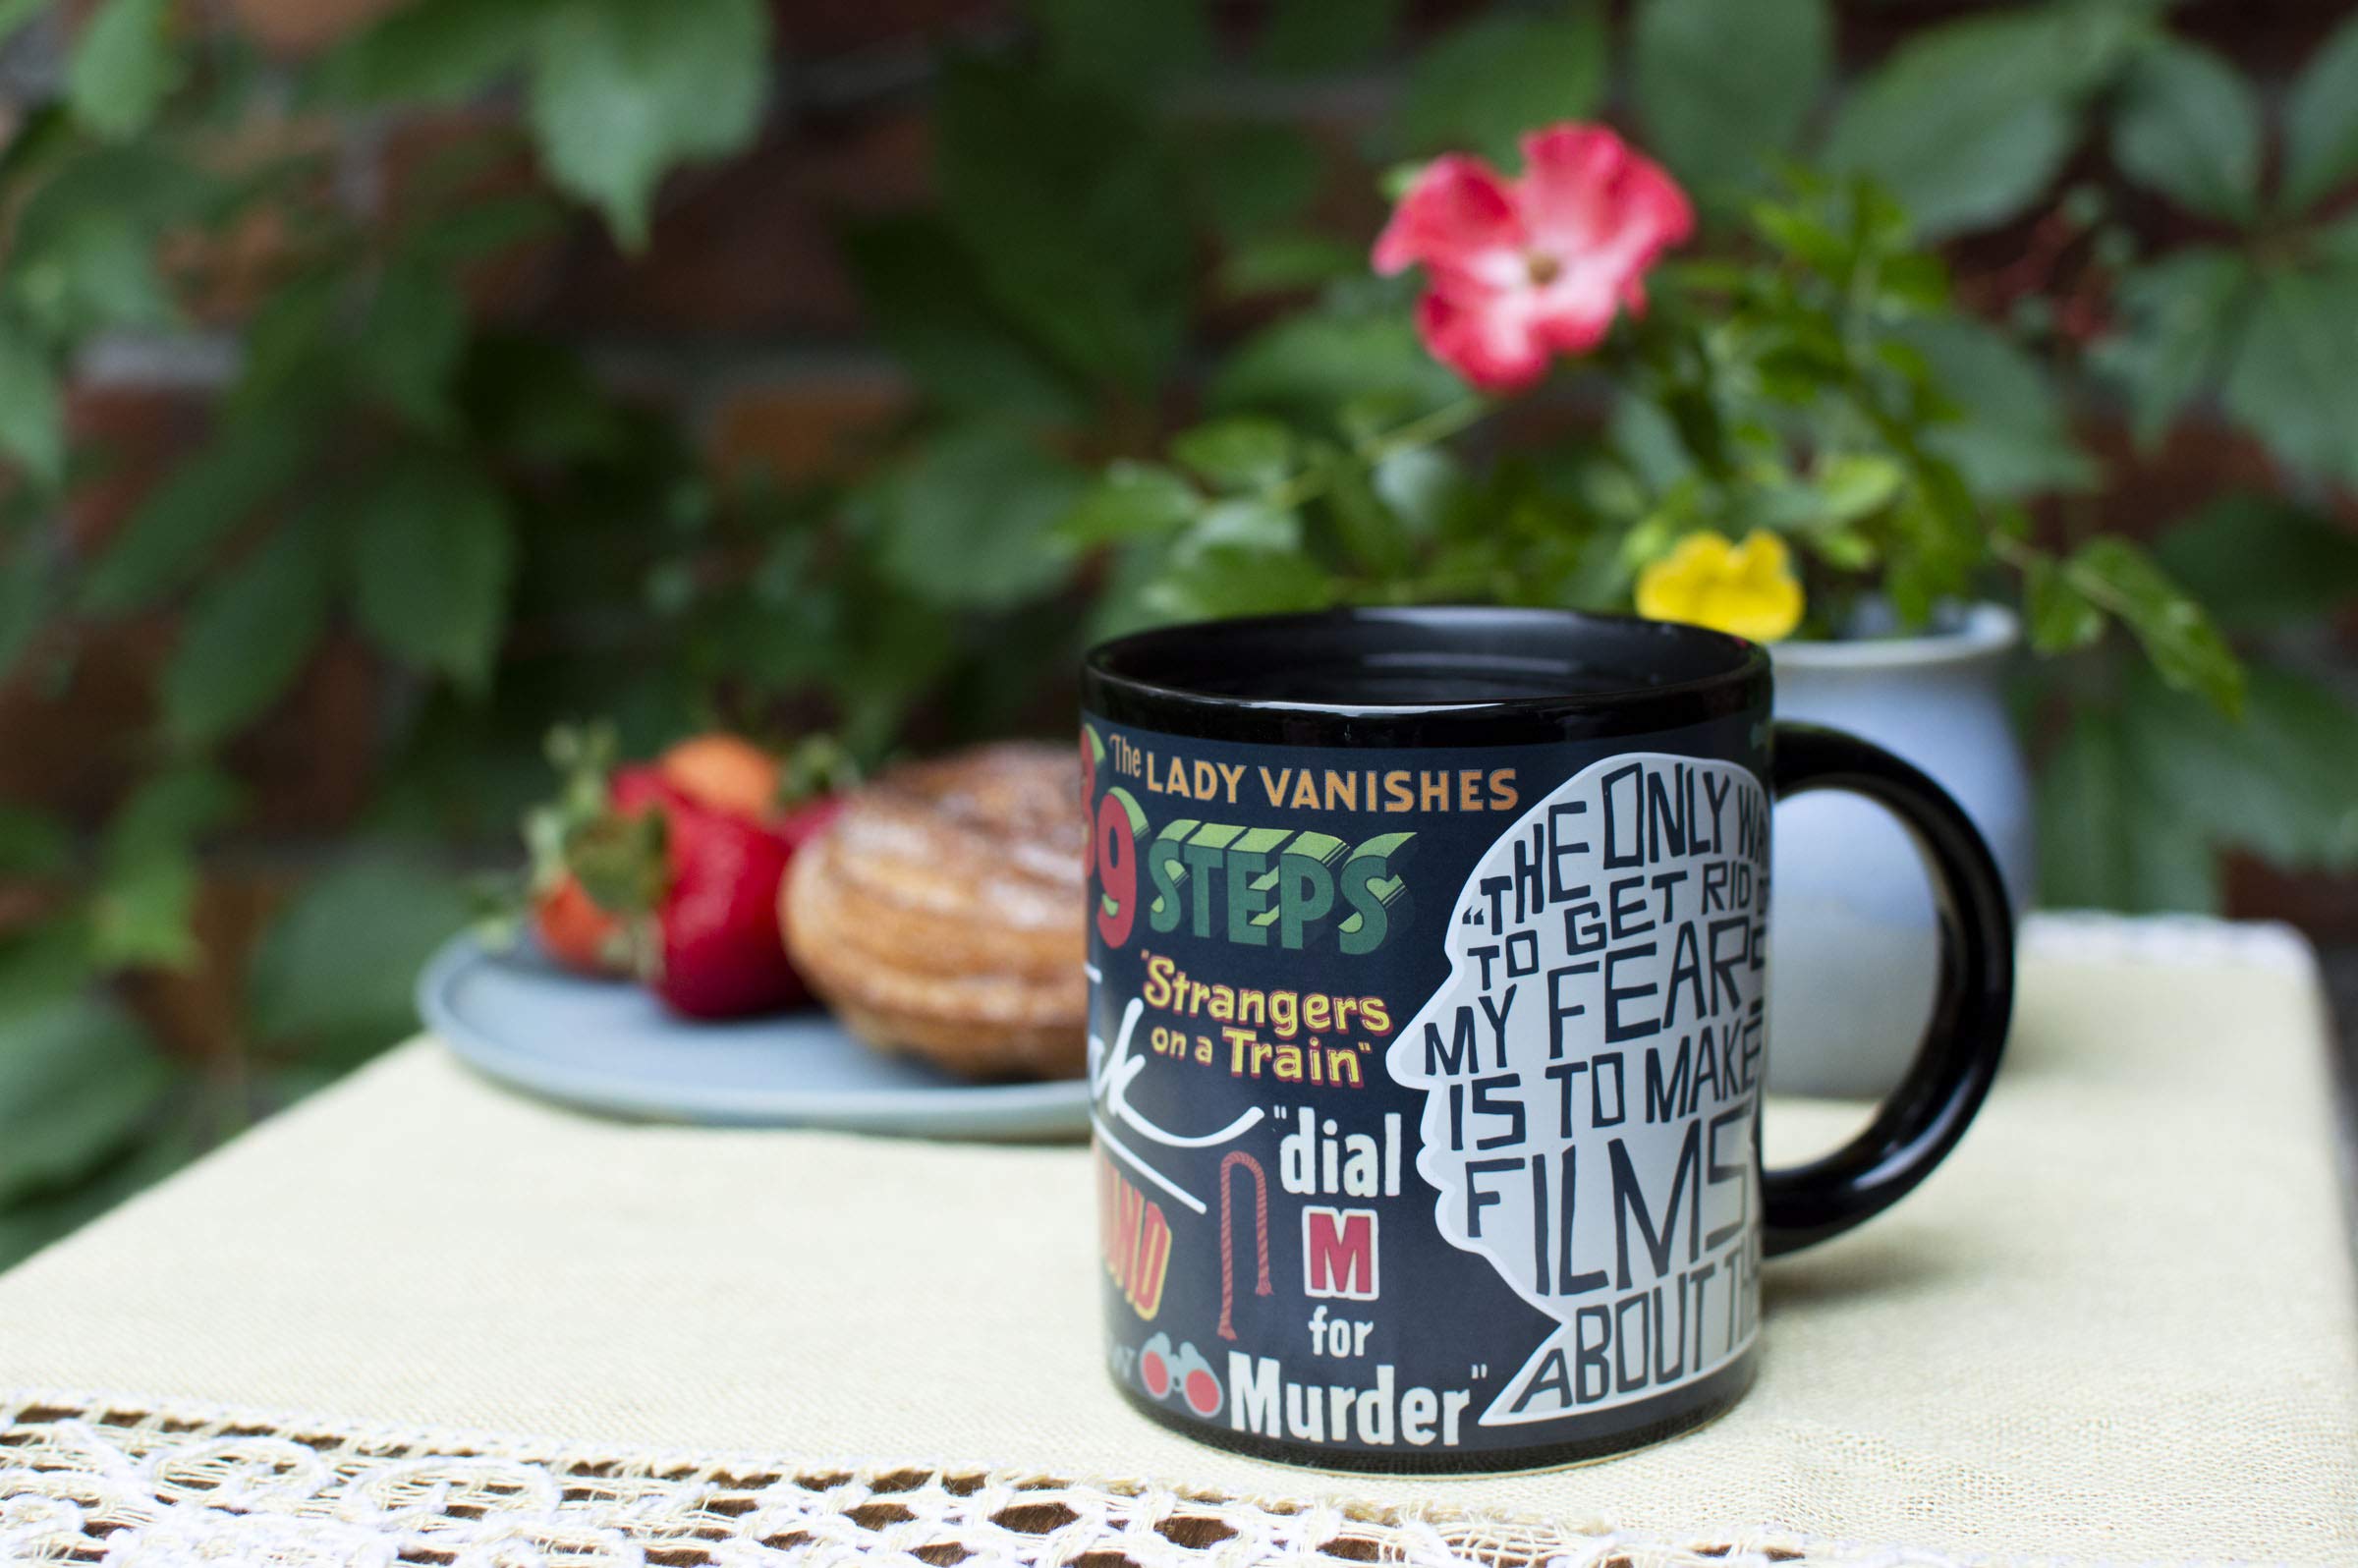 Heat Changing Alfred Hitchcock Movie Titles Mug - Add Coffee and His Most Famous Films Appear